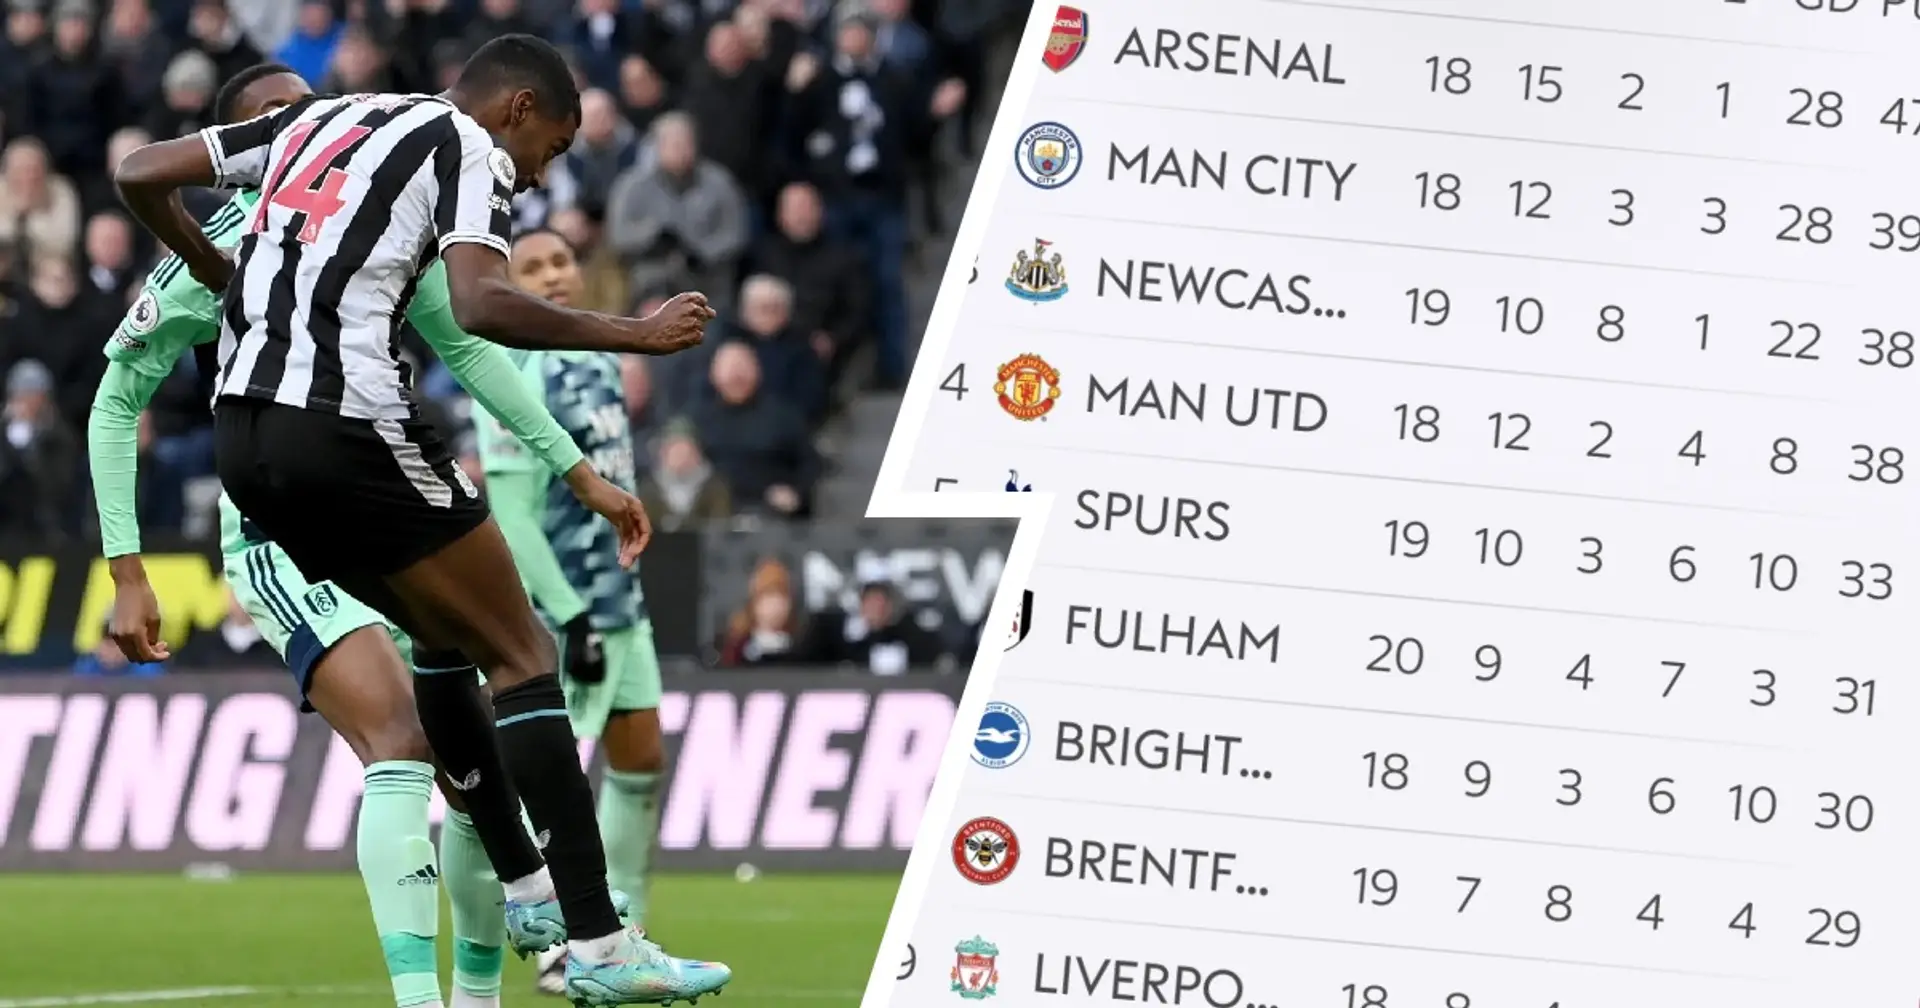 United drop to 4th after Newcastle result & 2 more under-radar stories today